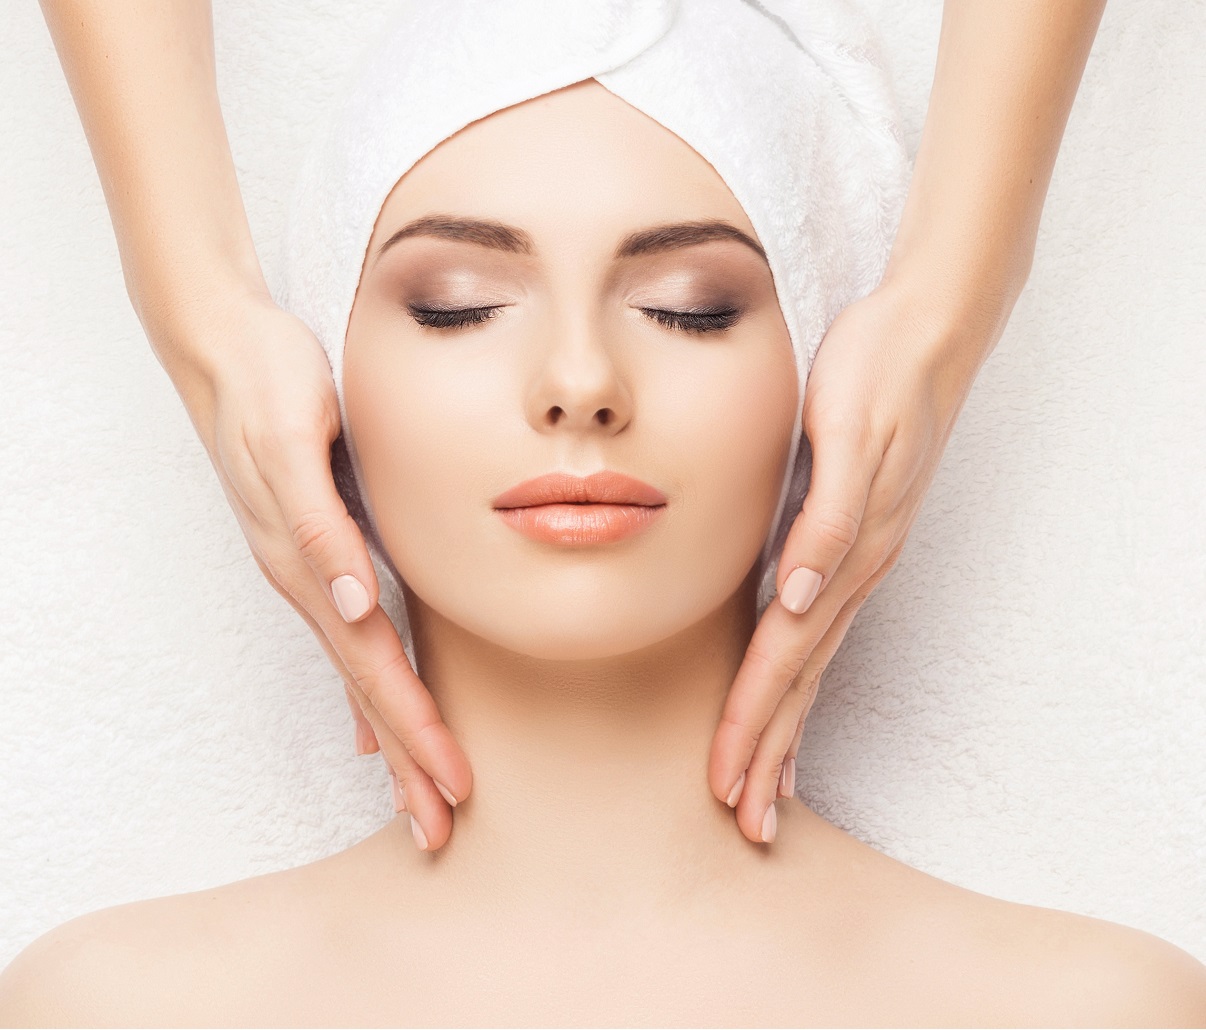 Portrait of a woman in spa. Massage healing procedure. Health care, skin lifting and medical concept | Aesthetic Center of Richmond Dermatology in Medical spa in Glen Allen, VA